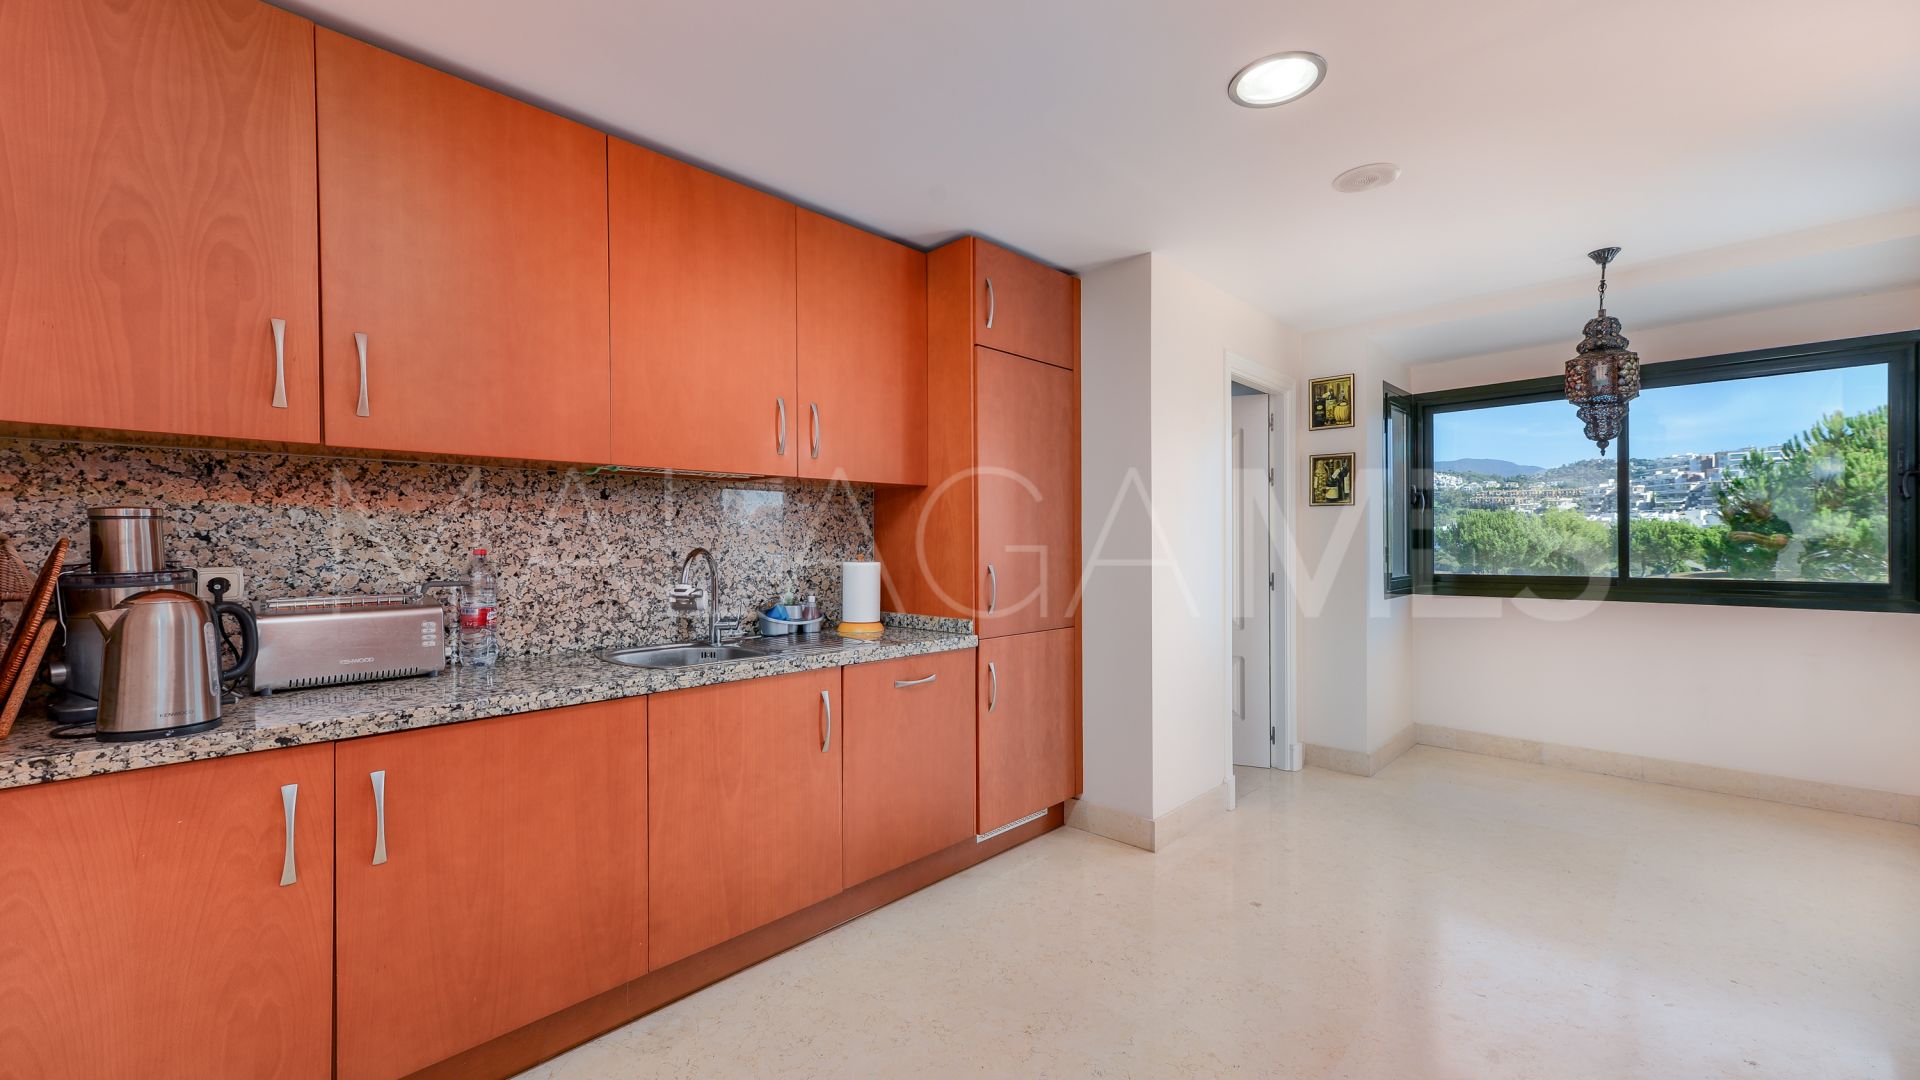 For sale Los Capanes del Golf duplex penthouse with 4 bedrooms